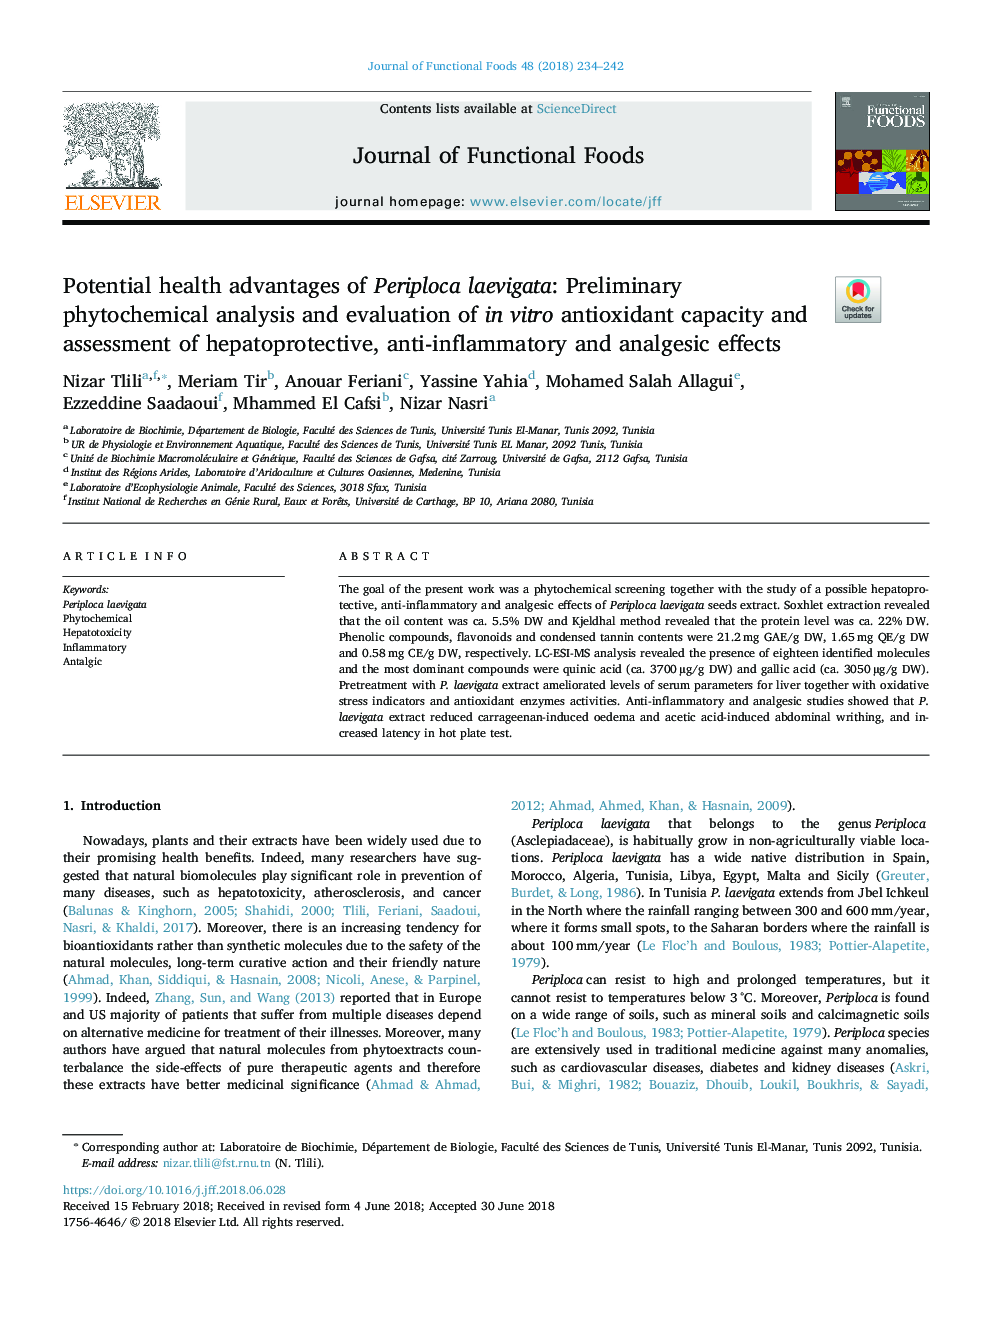 Potential health advantages of Periploca laevigata: Preliminary phytochemical analysis and evaluation of in vitro antioxidant capacity and assessment of hepatoprotective, anti-inflammatory and analgesic effects